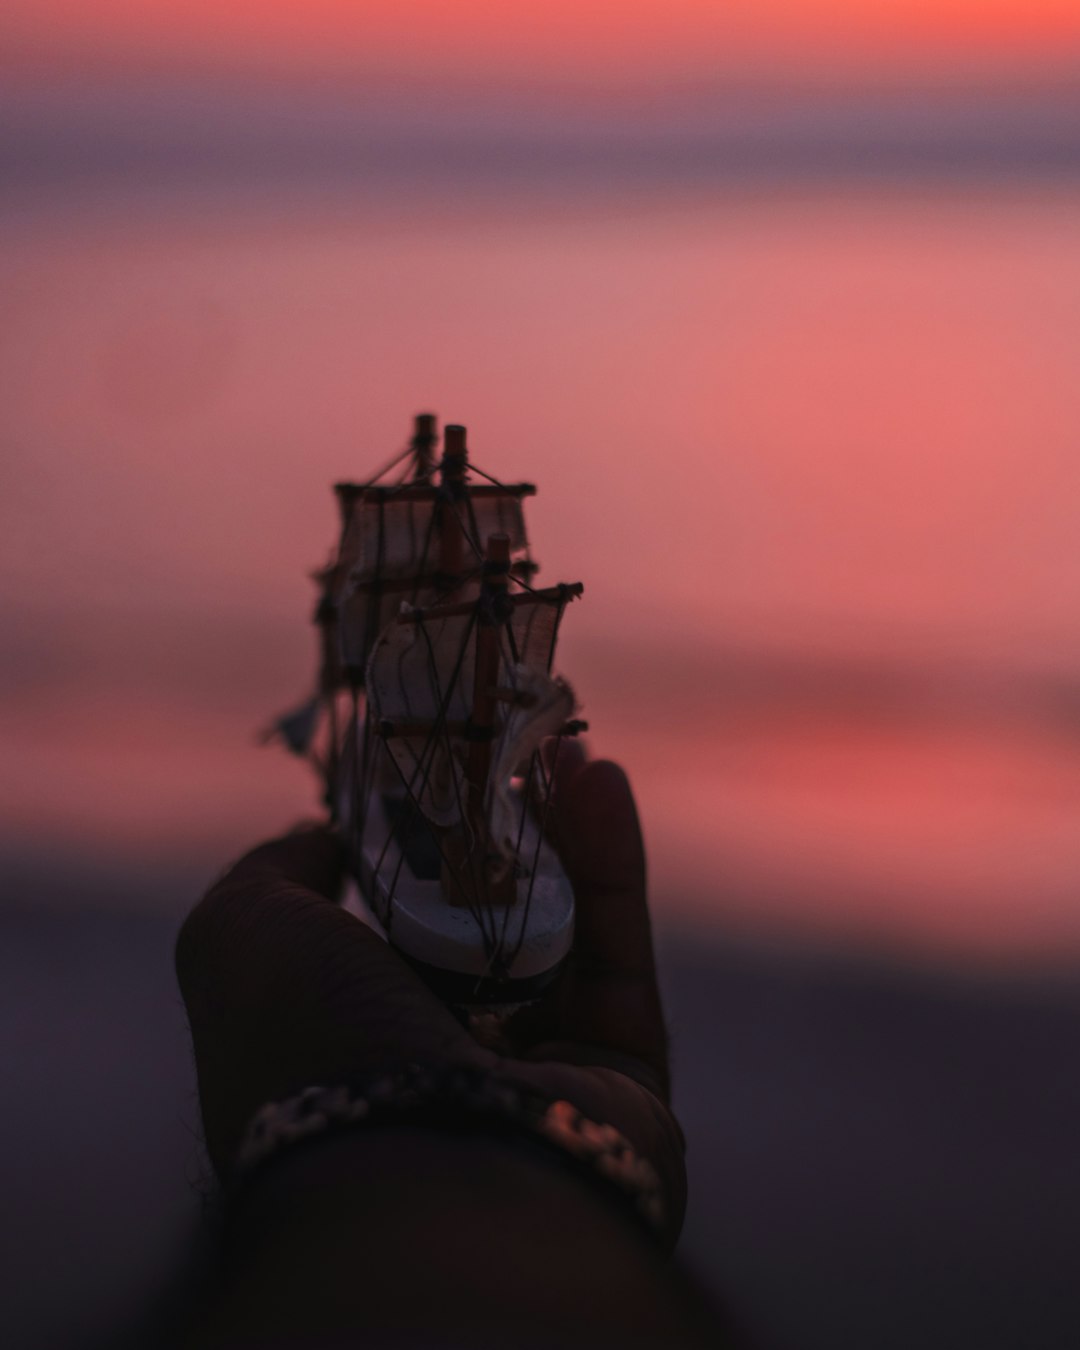 person holding a white and brown ship miniature